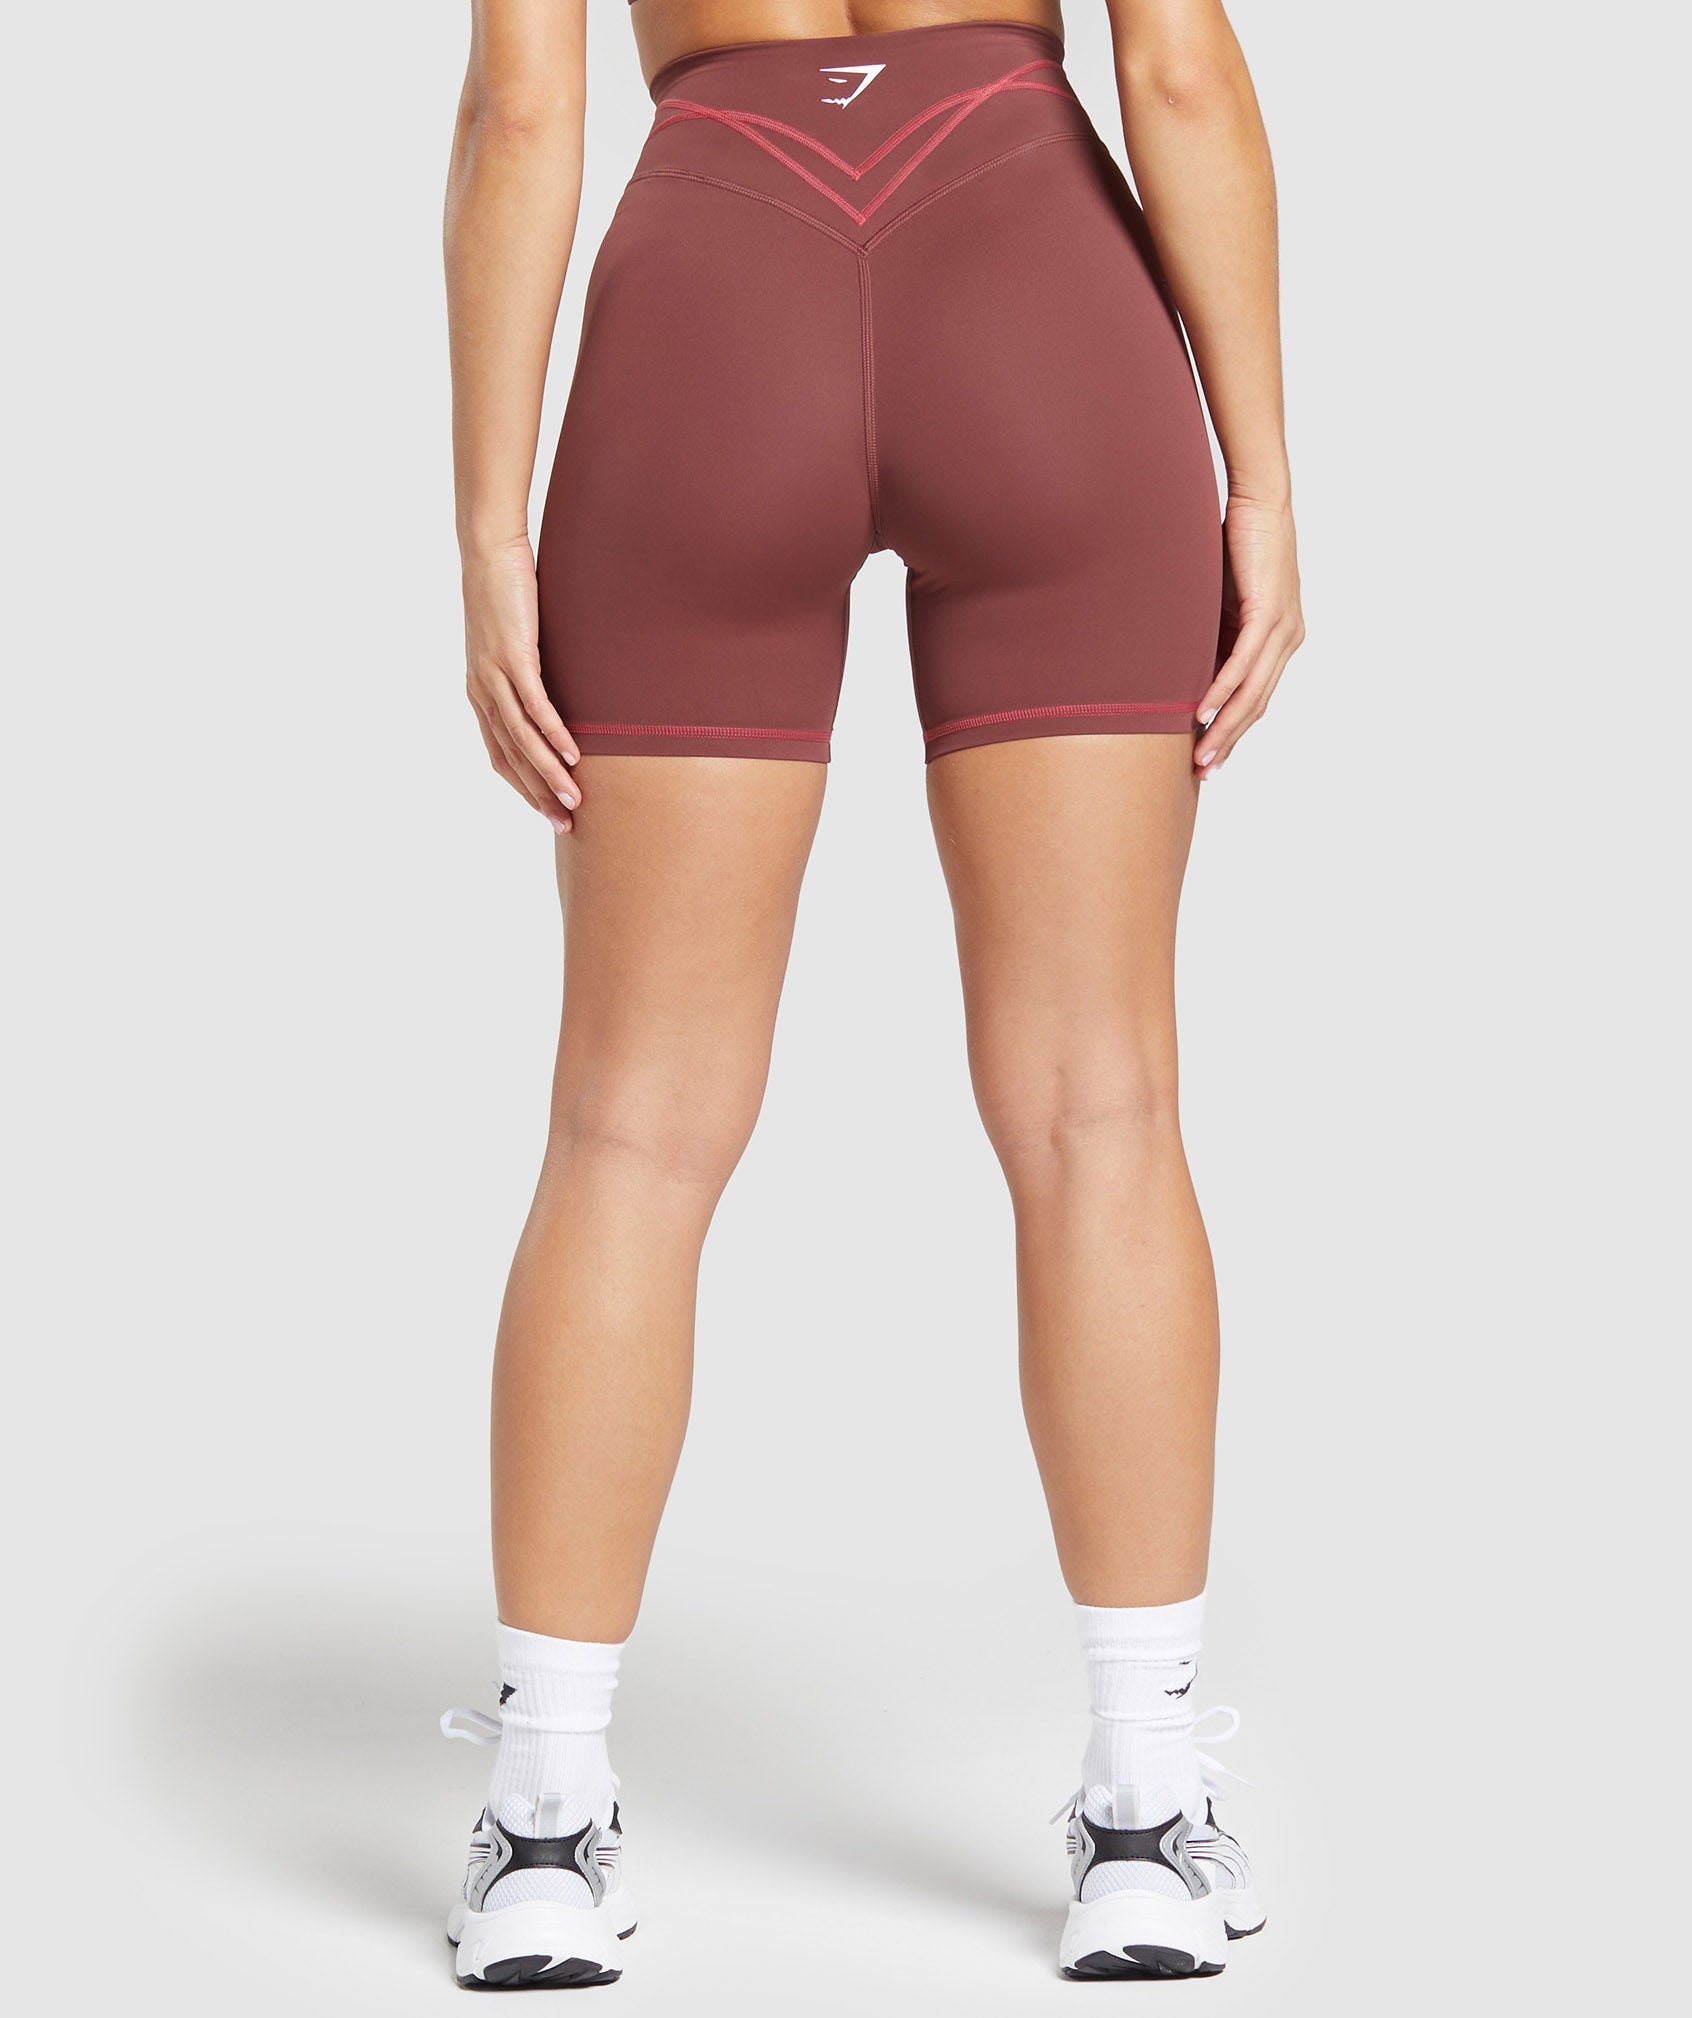 Stitch Feature Shorts in Burgundy Brown - view 2